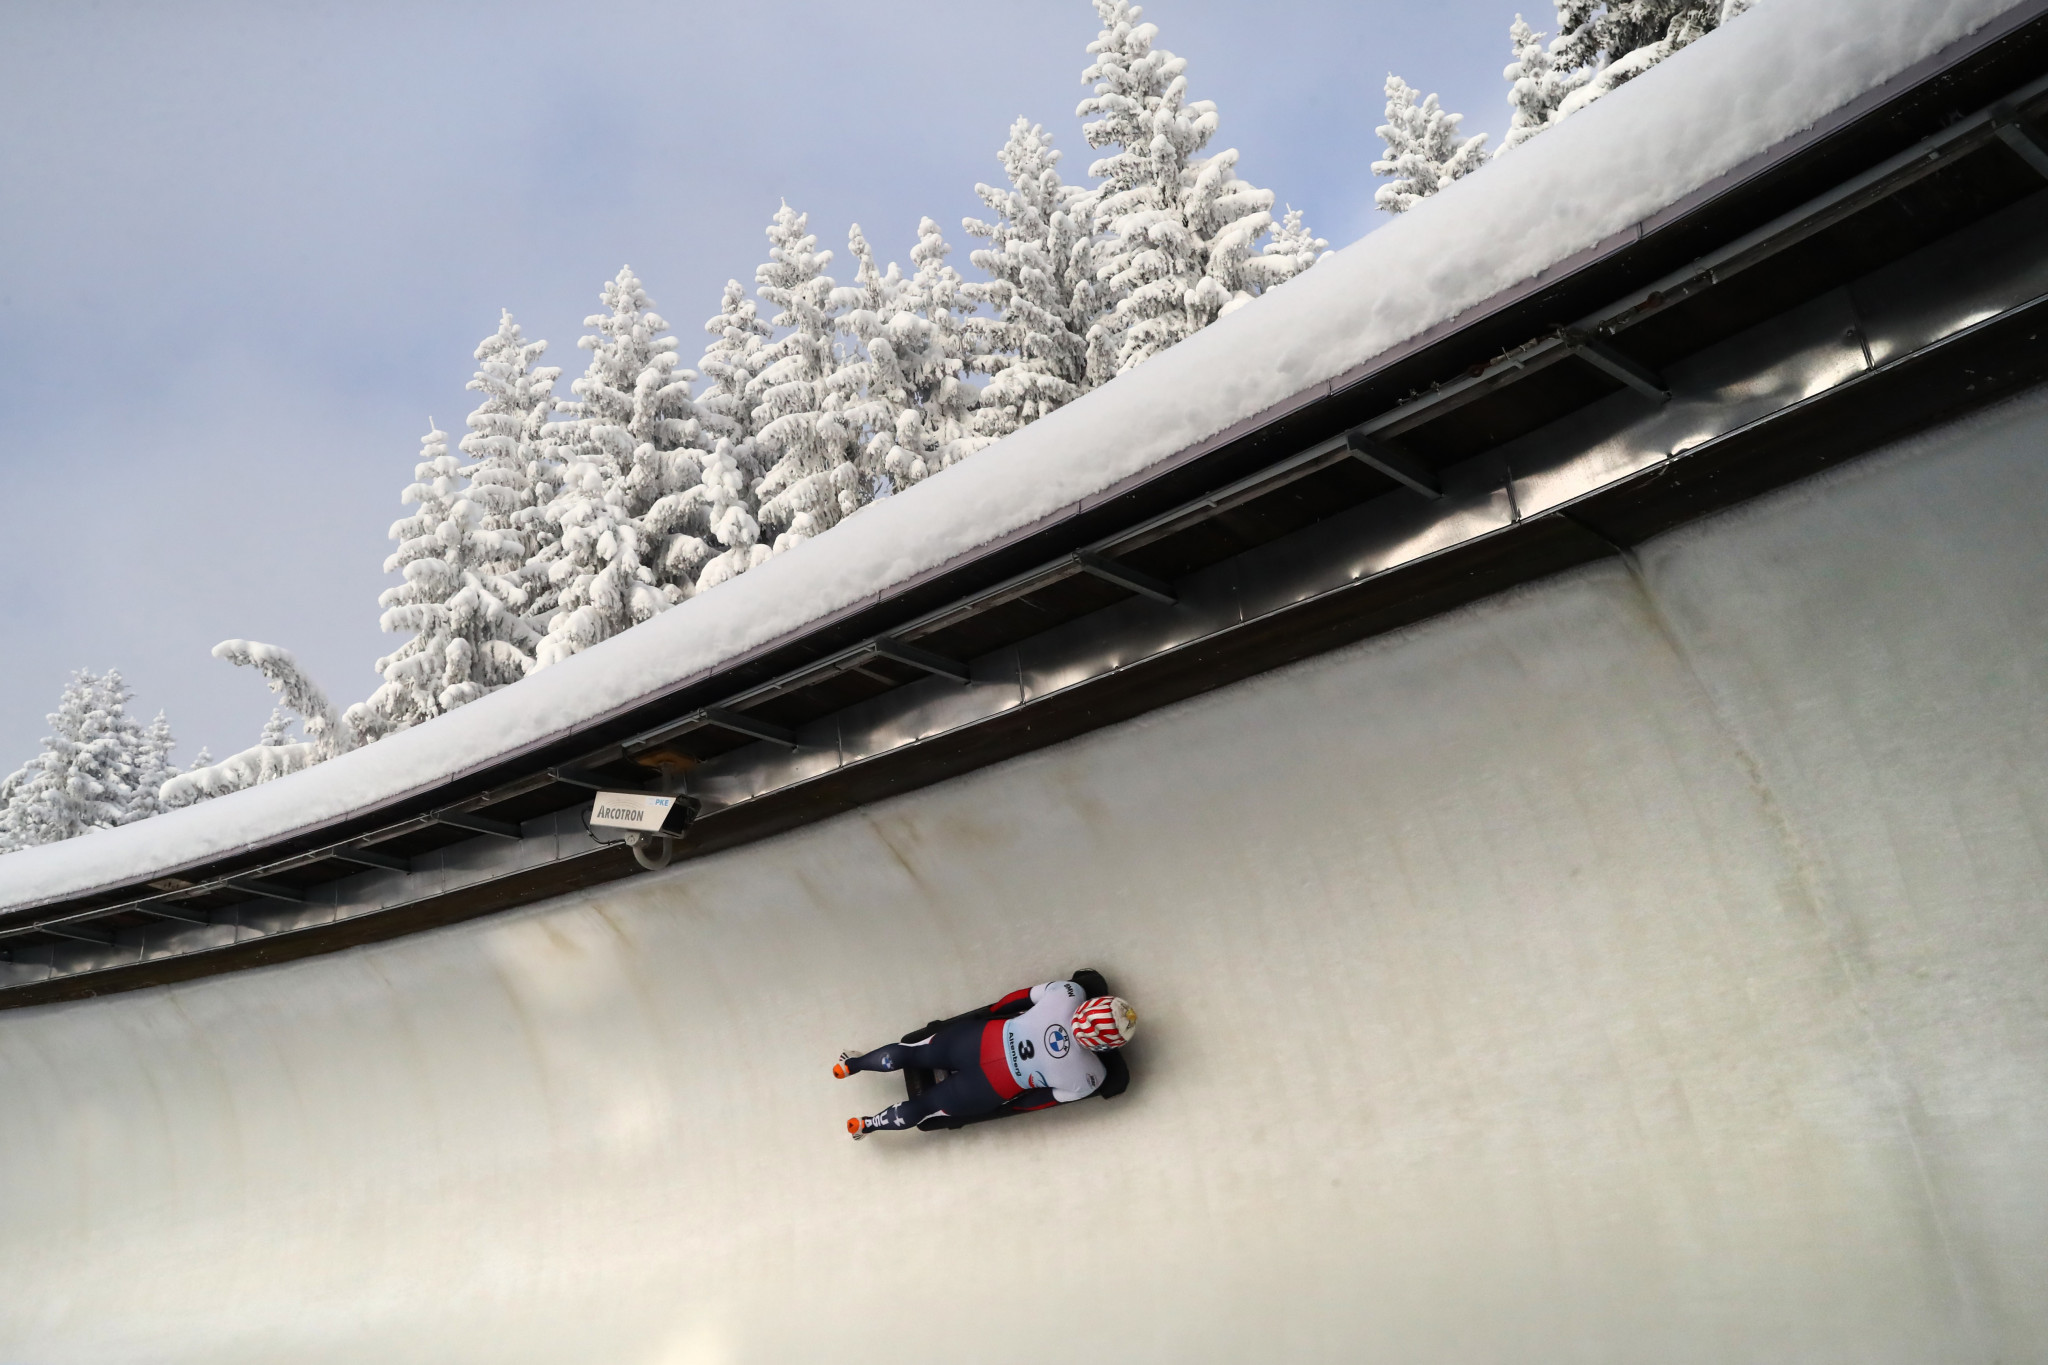 USA Bobsled and Skeleton partner with TeachAids to provide concussion education